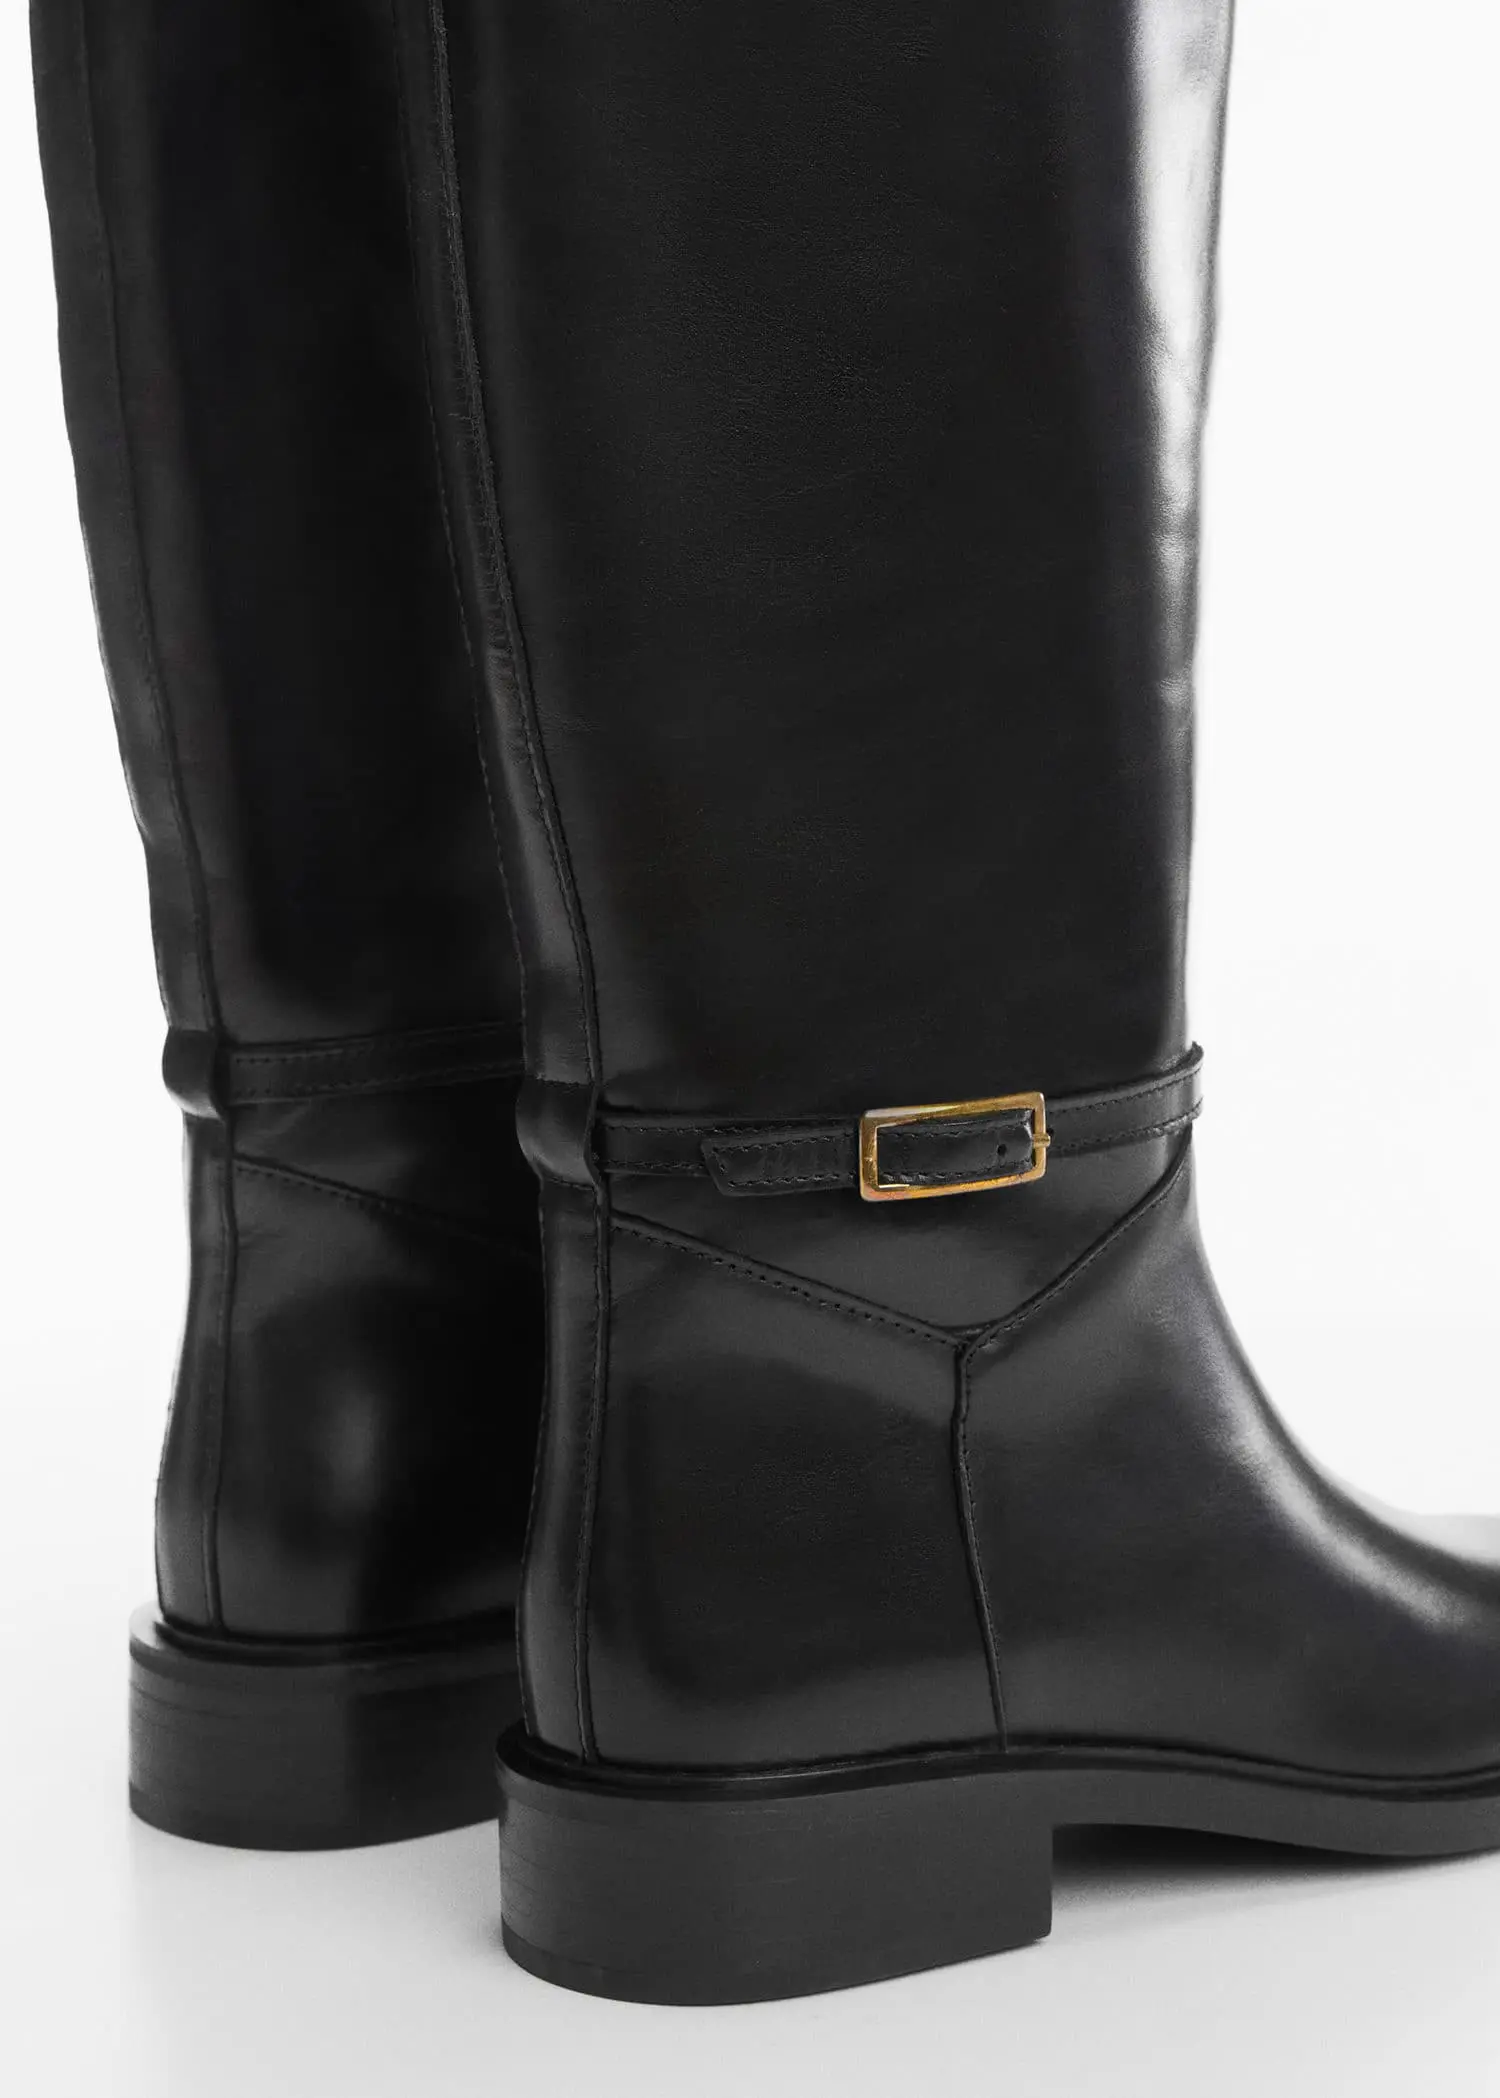 Mango Buckles leather boots. 3